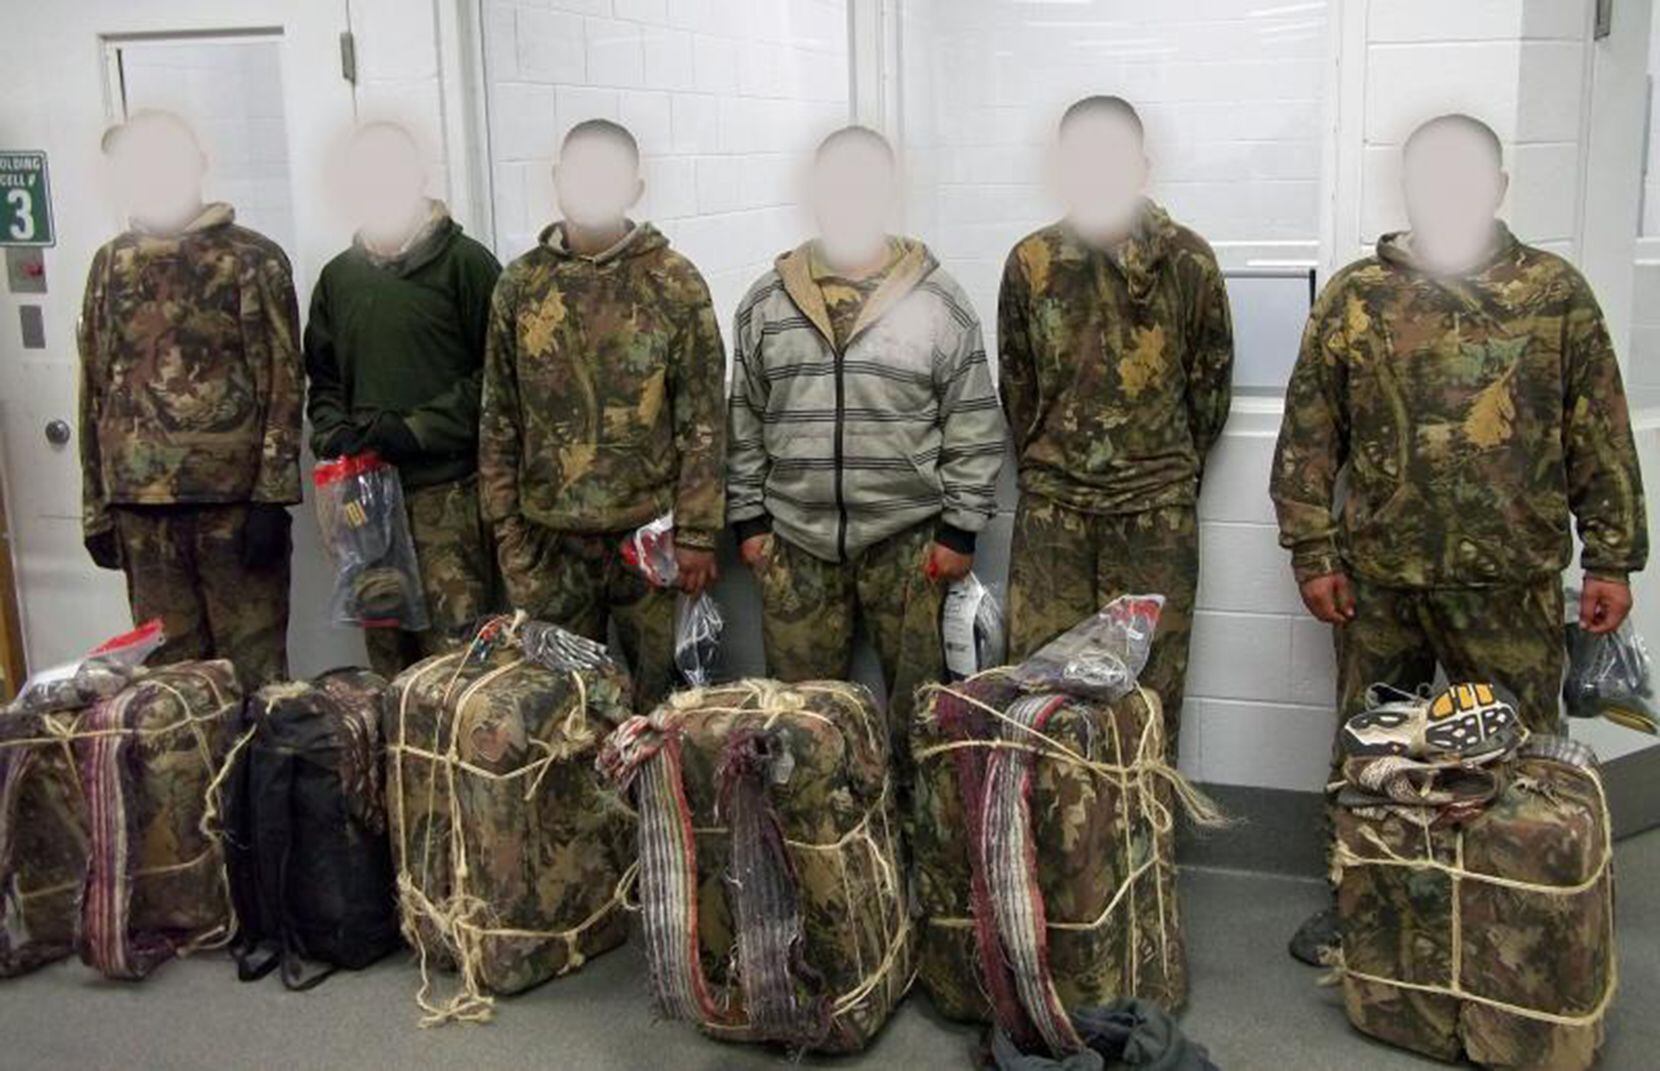 U.S. authorities caught six men on Dec. 21, 2015, as they tried to smuggle 275 pounds of...